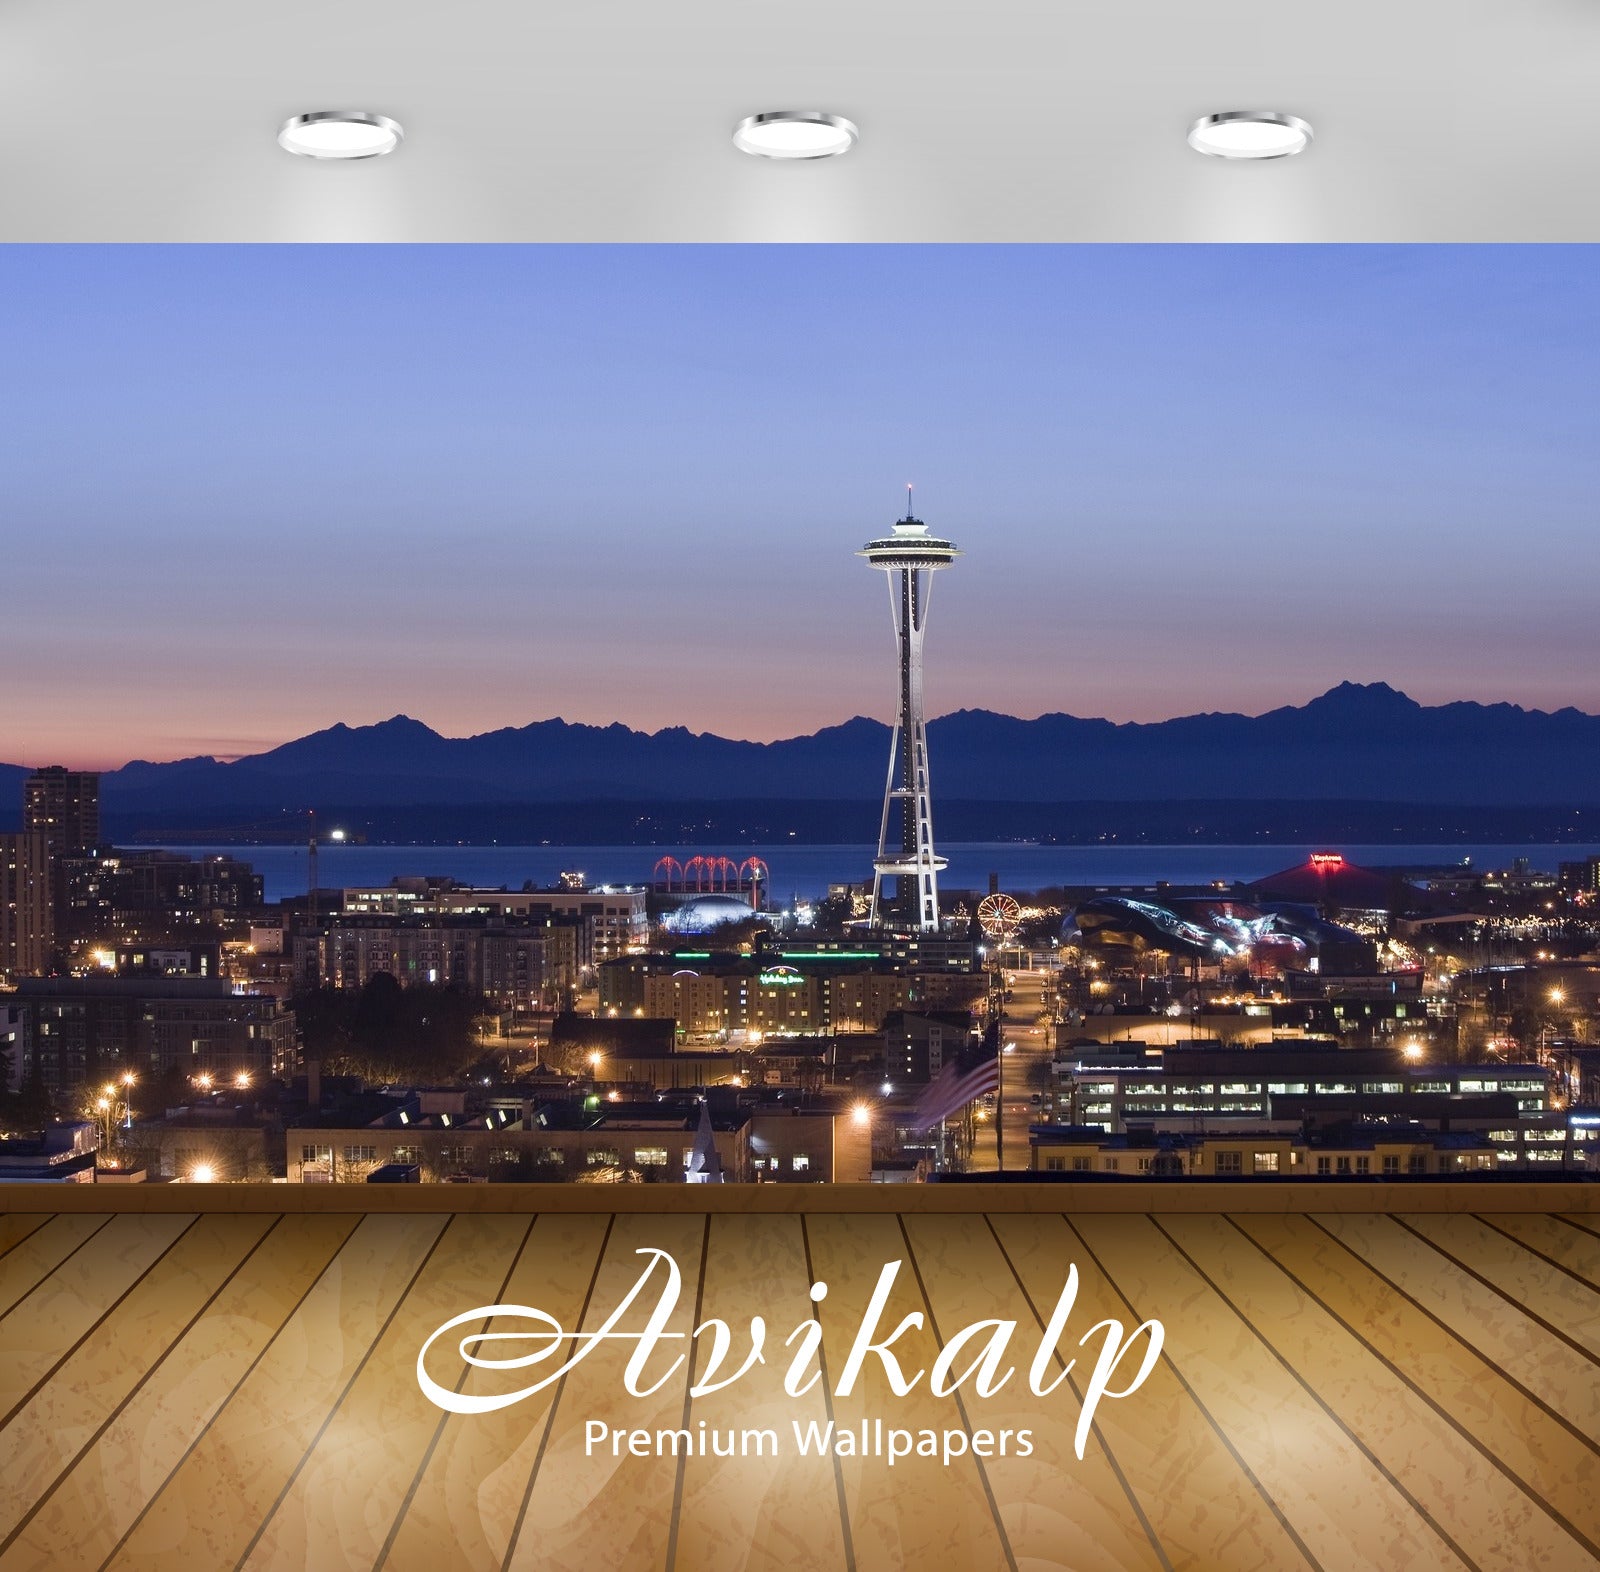 Avikalp Exclusive Awi1317 Space Needle Full HD Wallpapers for Living room, Hall, Kids Room, Kitchen,